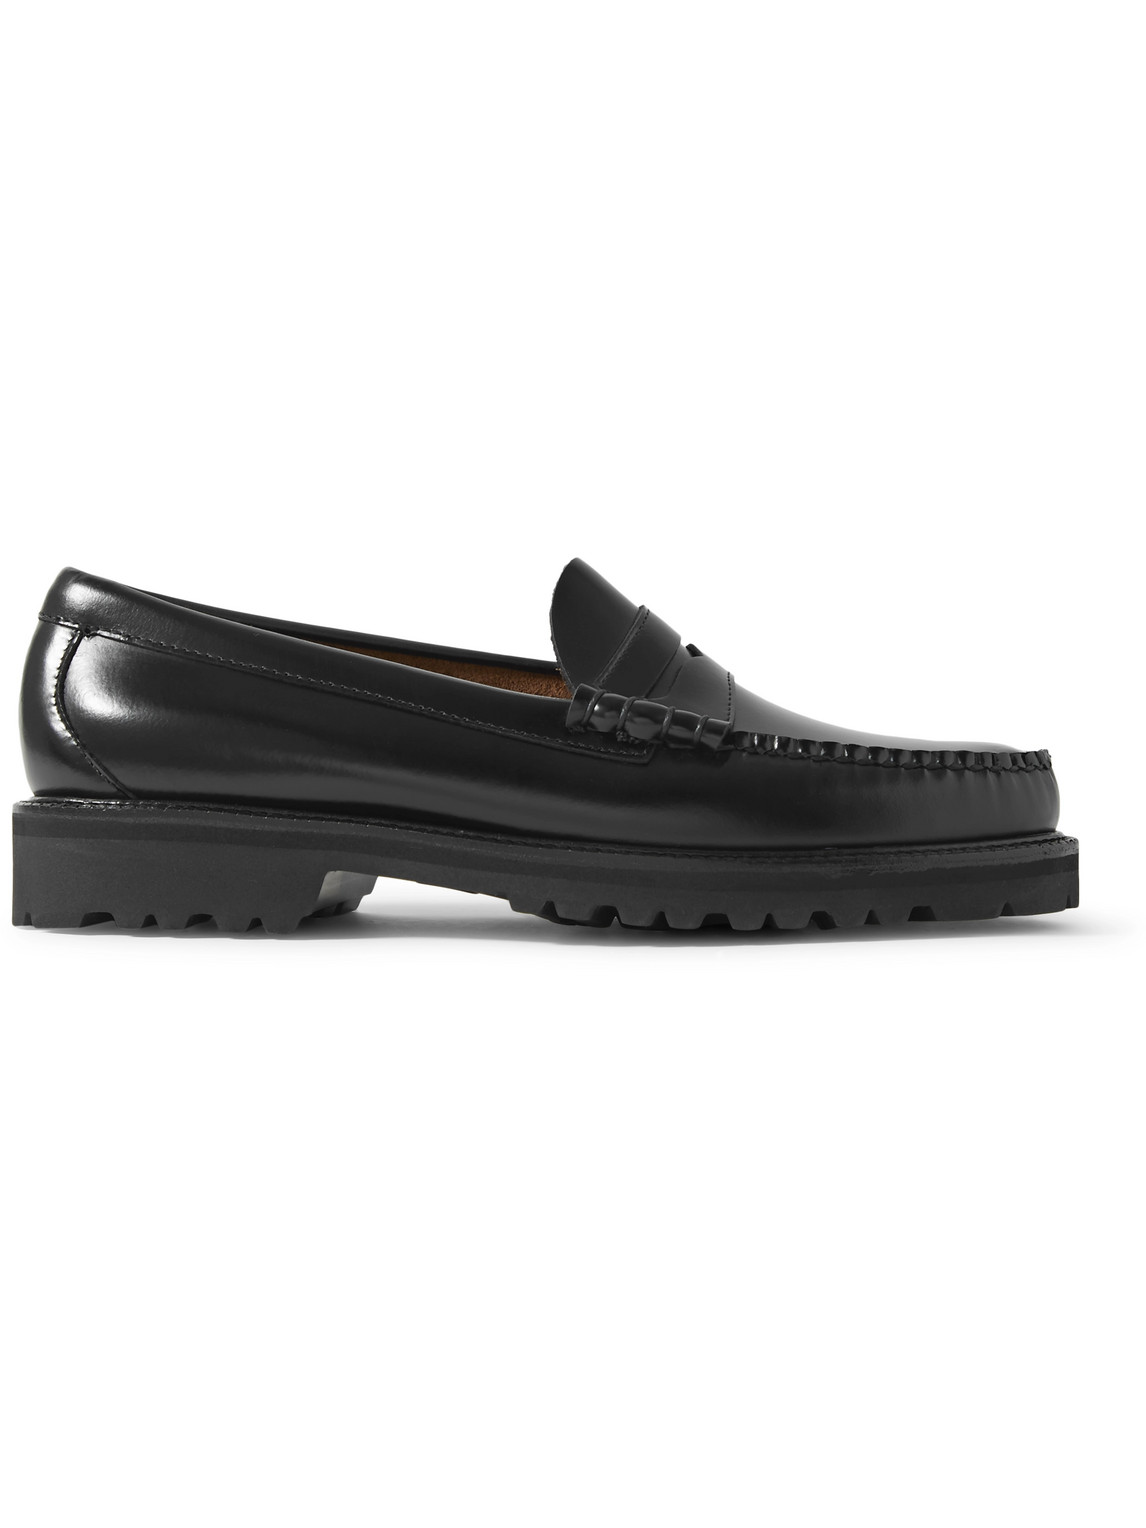 G.H. Bass & Co. - Weejuns 90 Larson Leather Penny Loafers - Men - Black - UK 11 von G.H. Bass & Co.